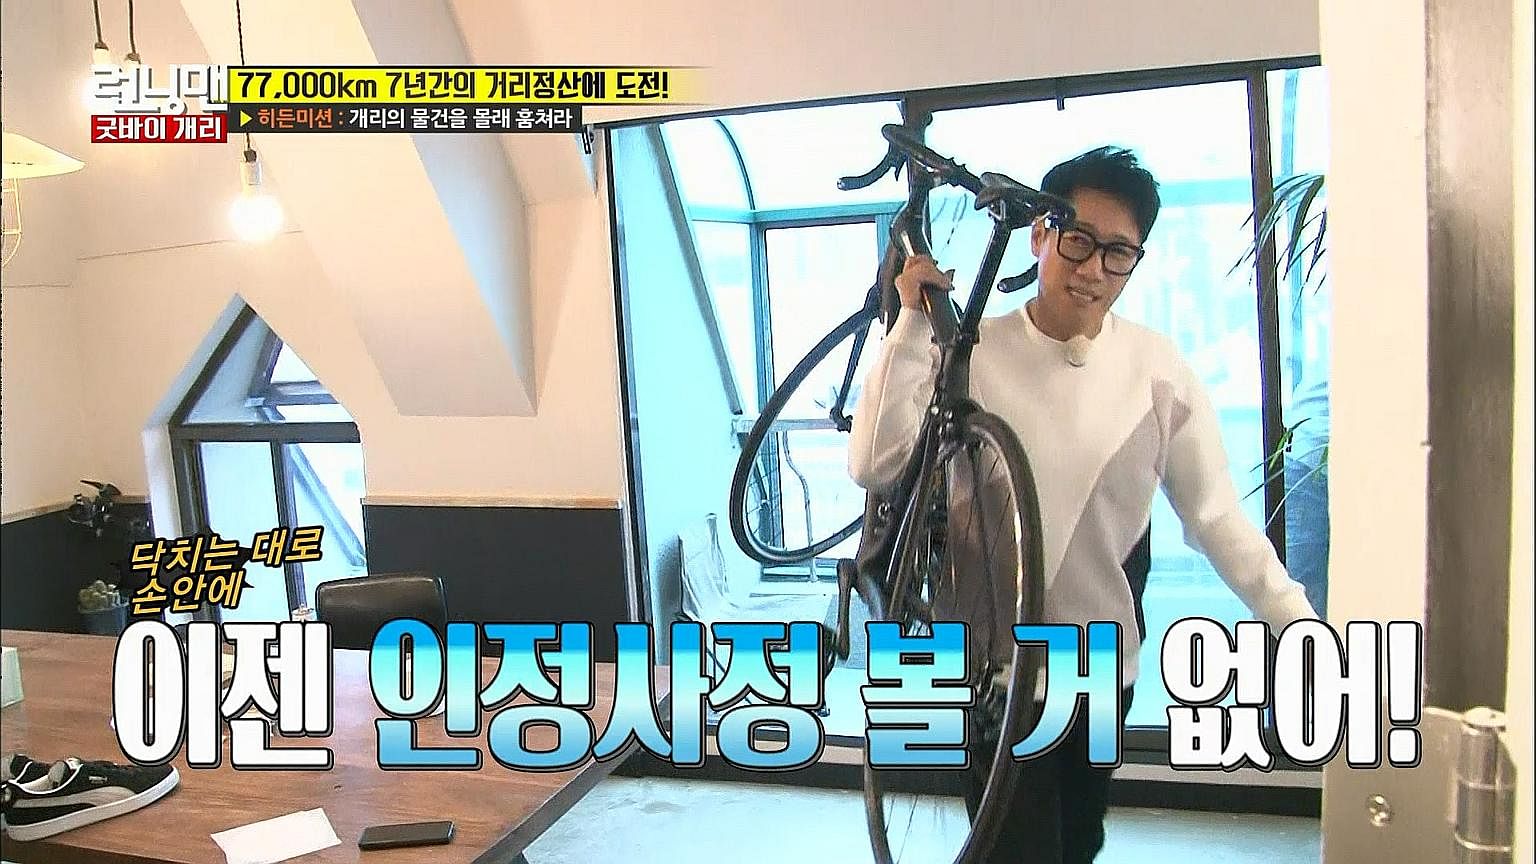 Running Man star Jee Seok Jin (above) trying to steal a bicycle from leaving member Gary.